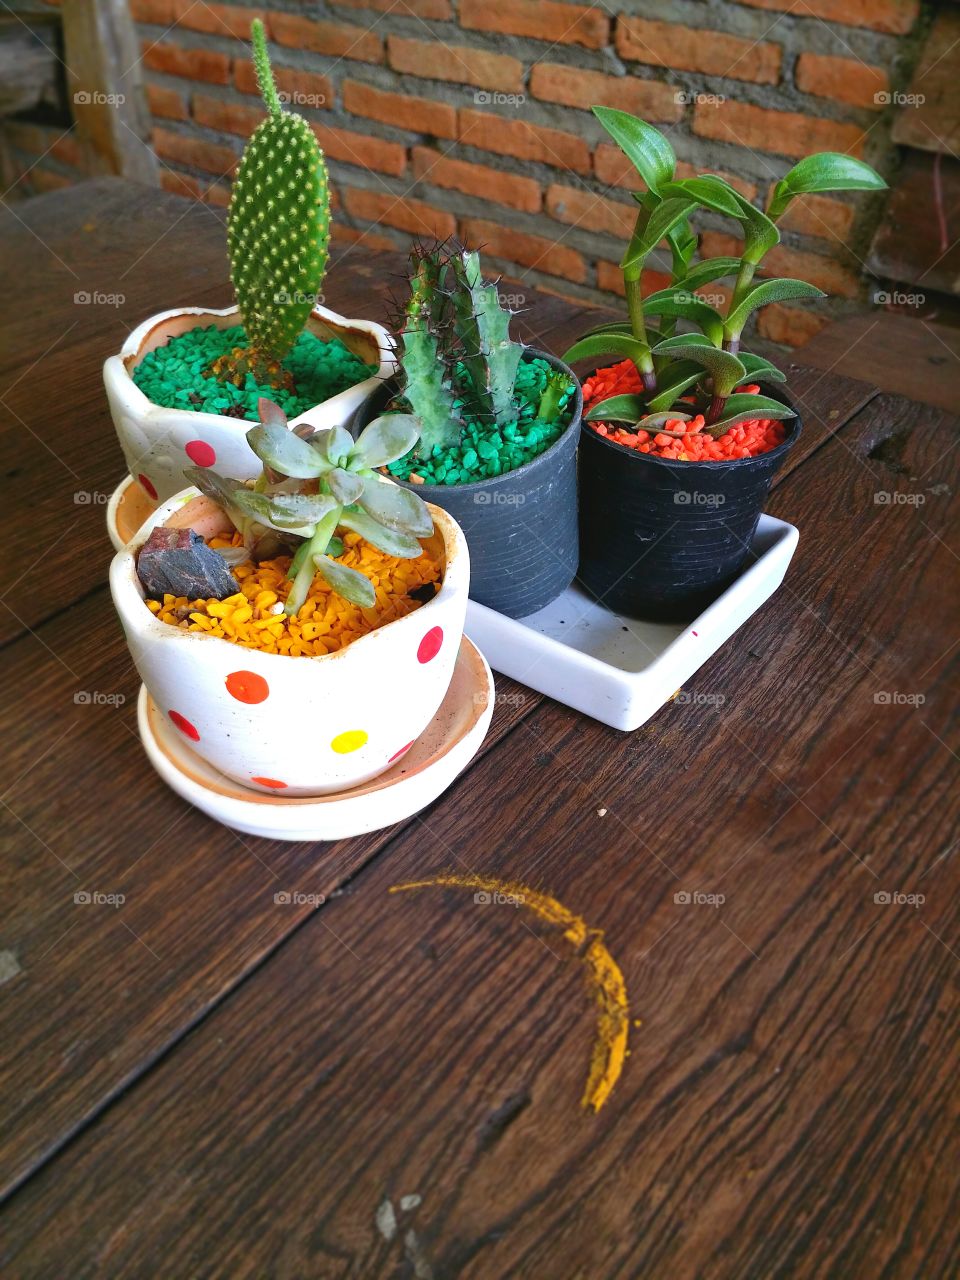 Small cactus and plants  in the pots on the table.